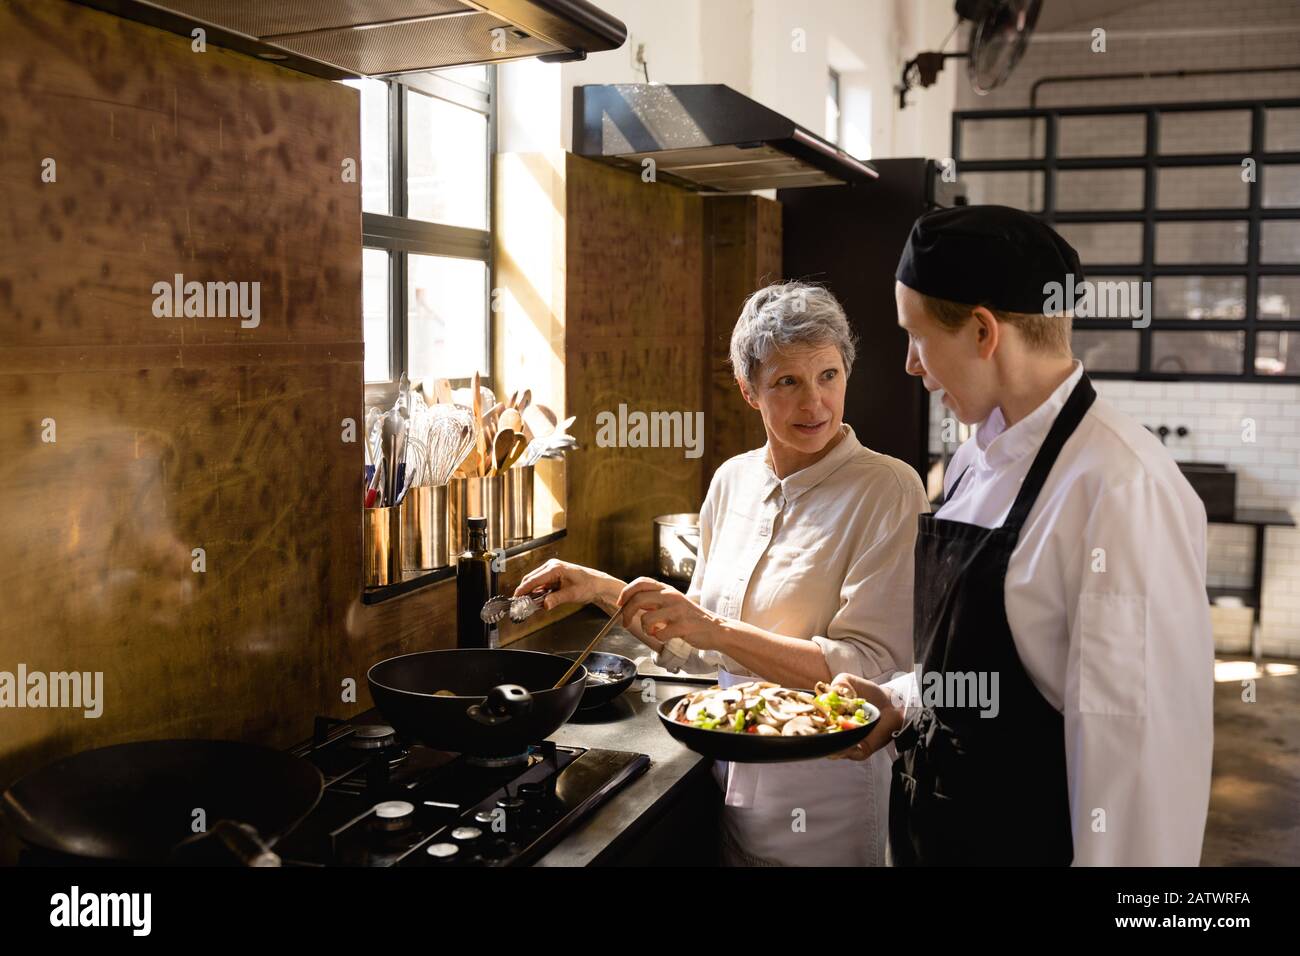 Caucasian chefs cooking vegetables Stock Photo